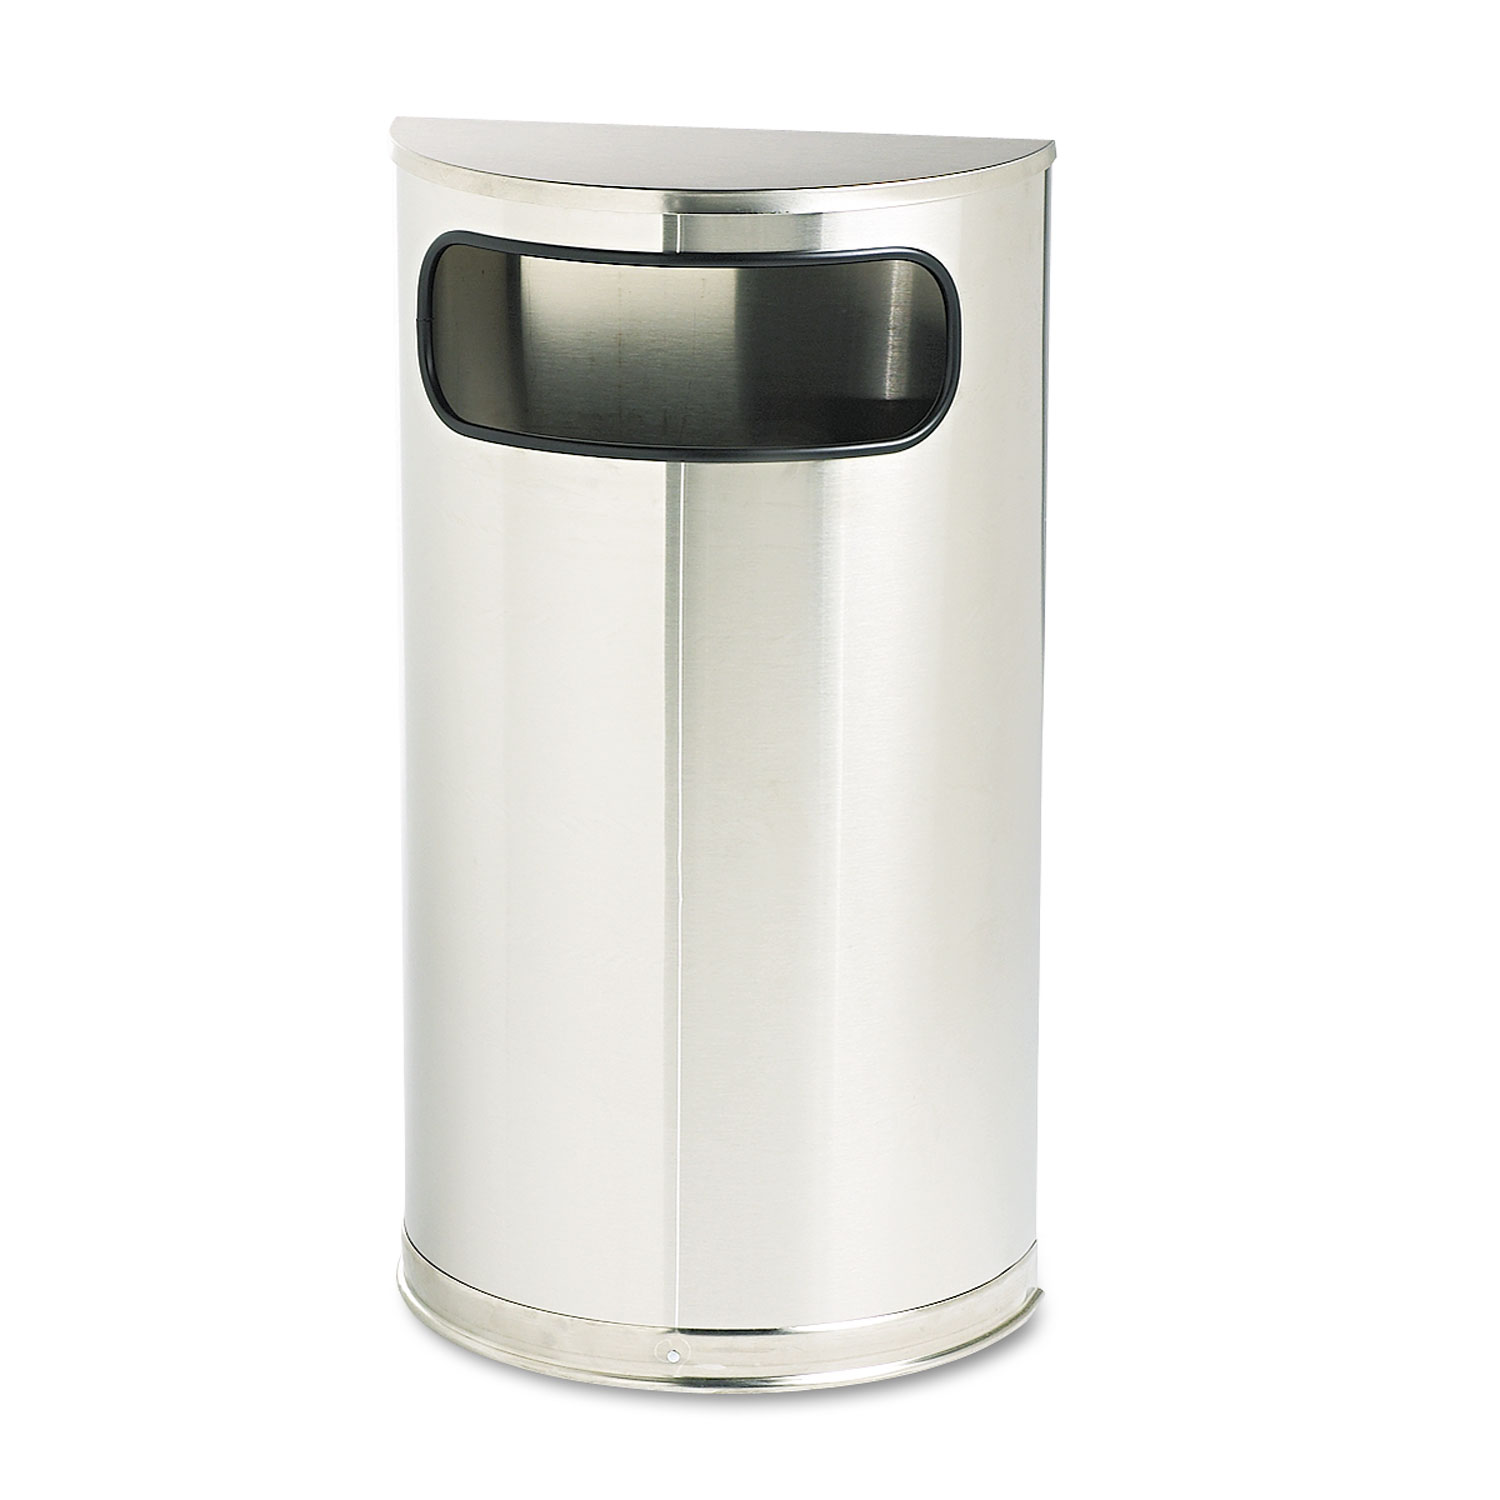  Rubbermaid Commercial FGSO8SSSPL European and Metallic Series Receptacle, Half-Round, 9 gal, Satin Stainless (RCPSO8SSSPL) 